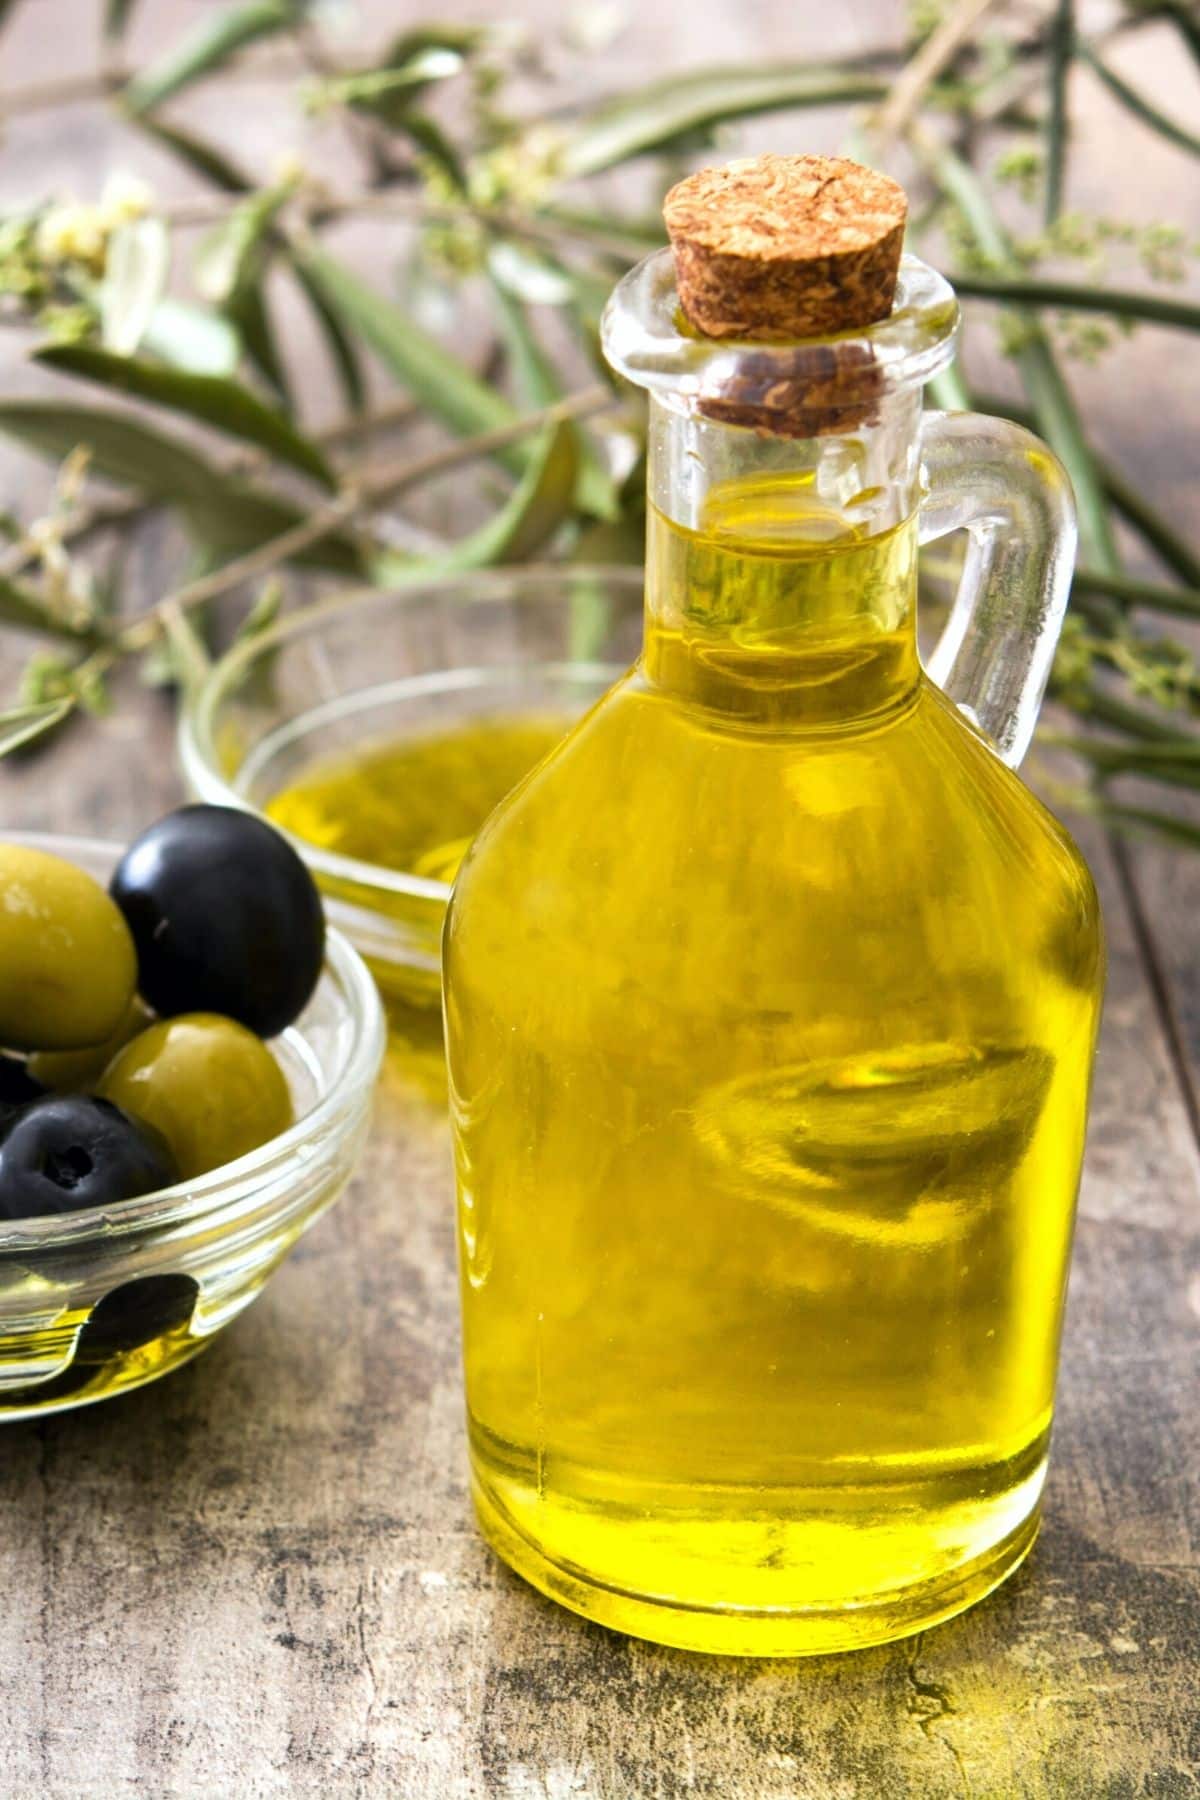 A small jar of olive oil.